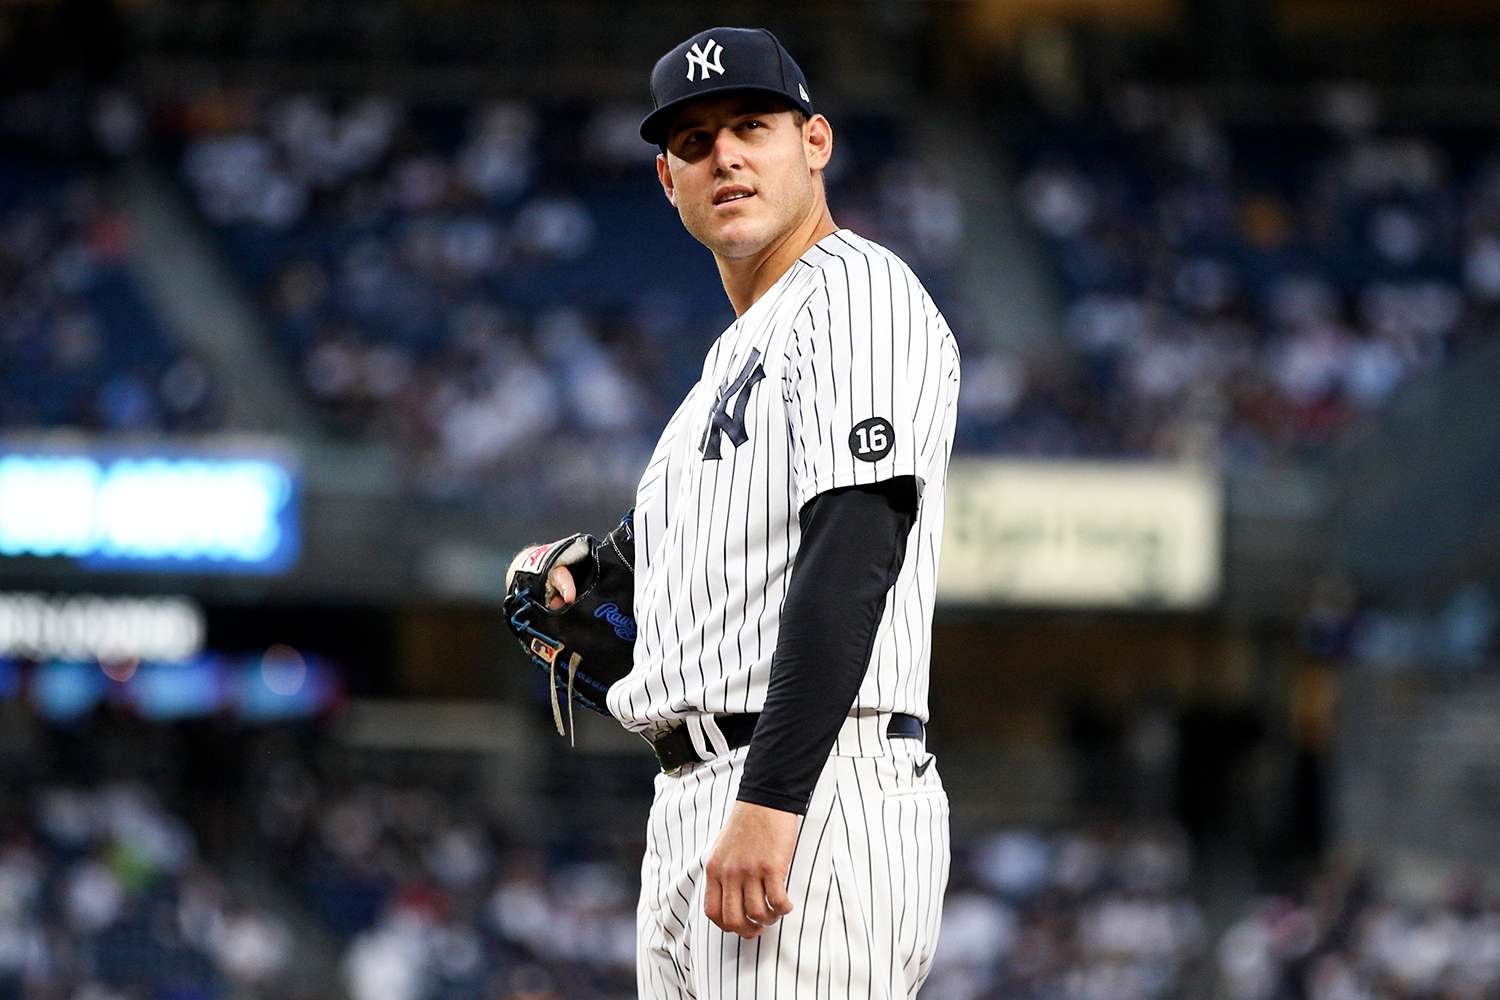 Anthony Rizzo #48 of the New York Yankees is seen during the game between the Seattle Mariners and the New York Yankees at Yankee Stadium on Thursday, August 5, 2021 in New York, New York.